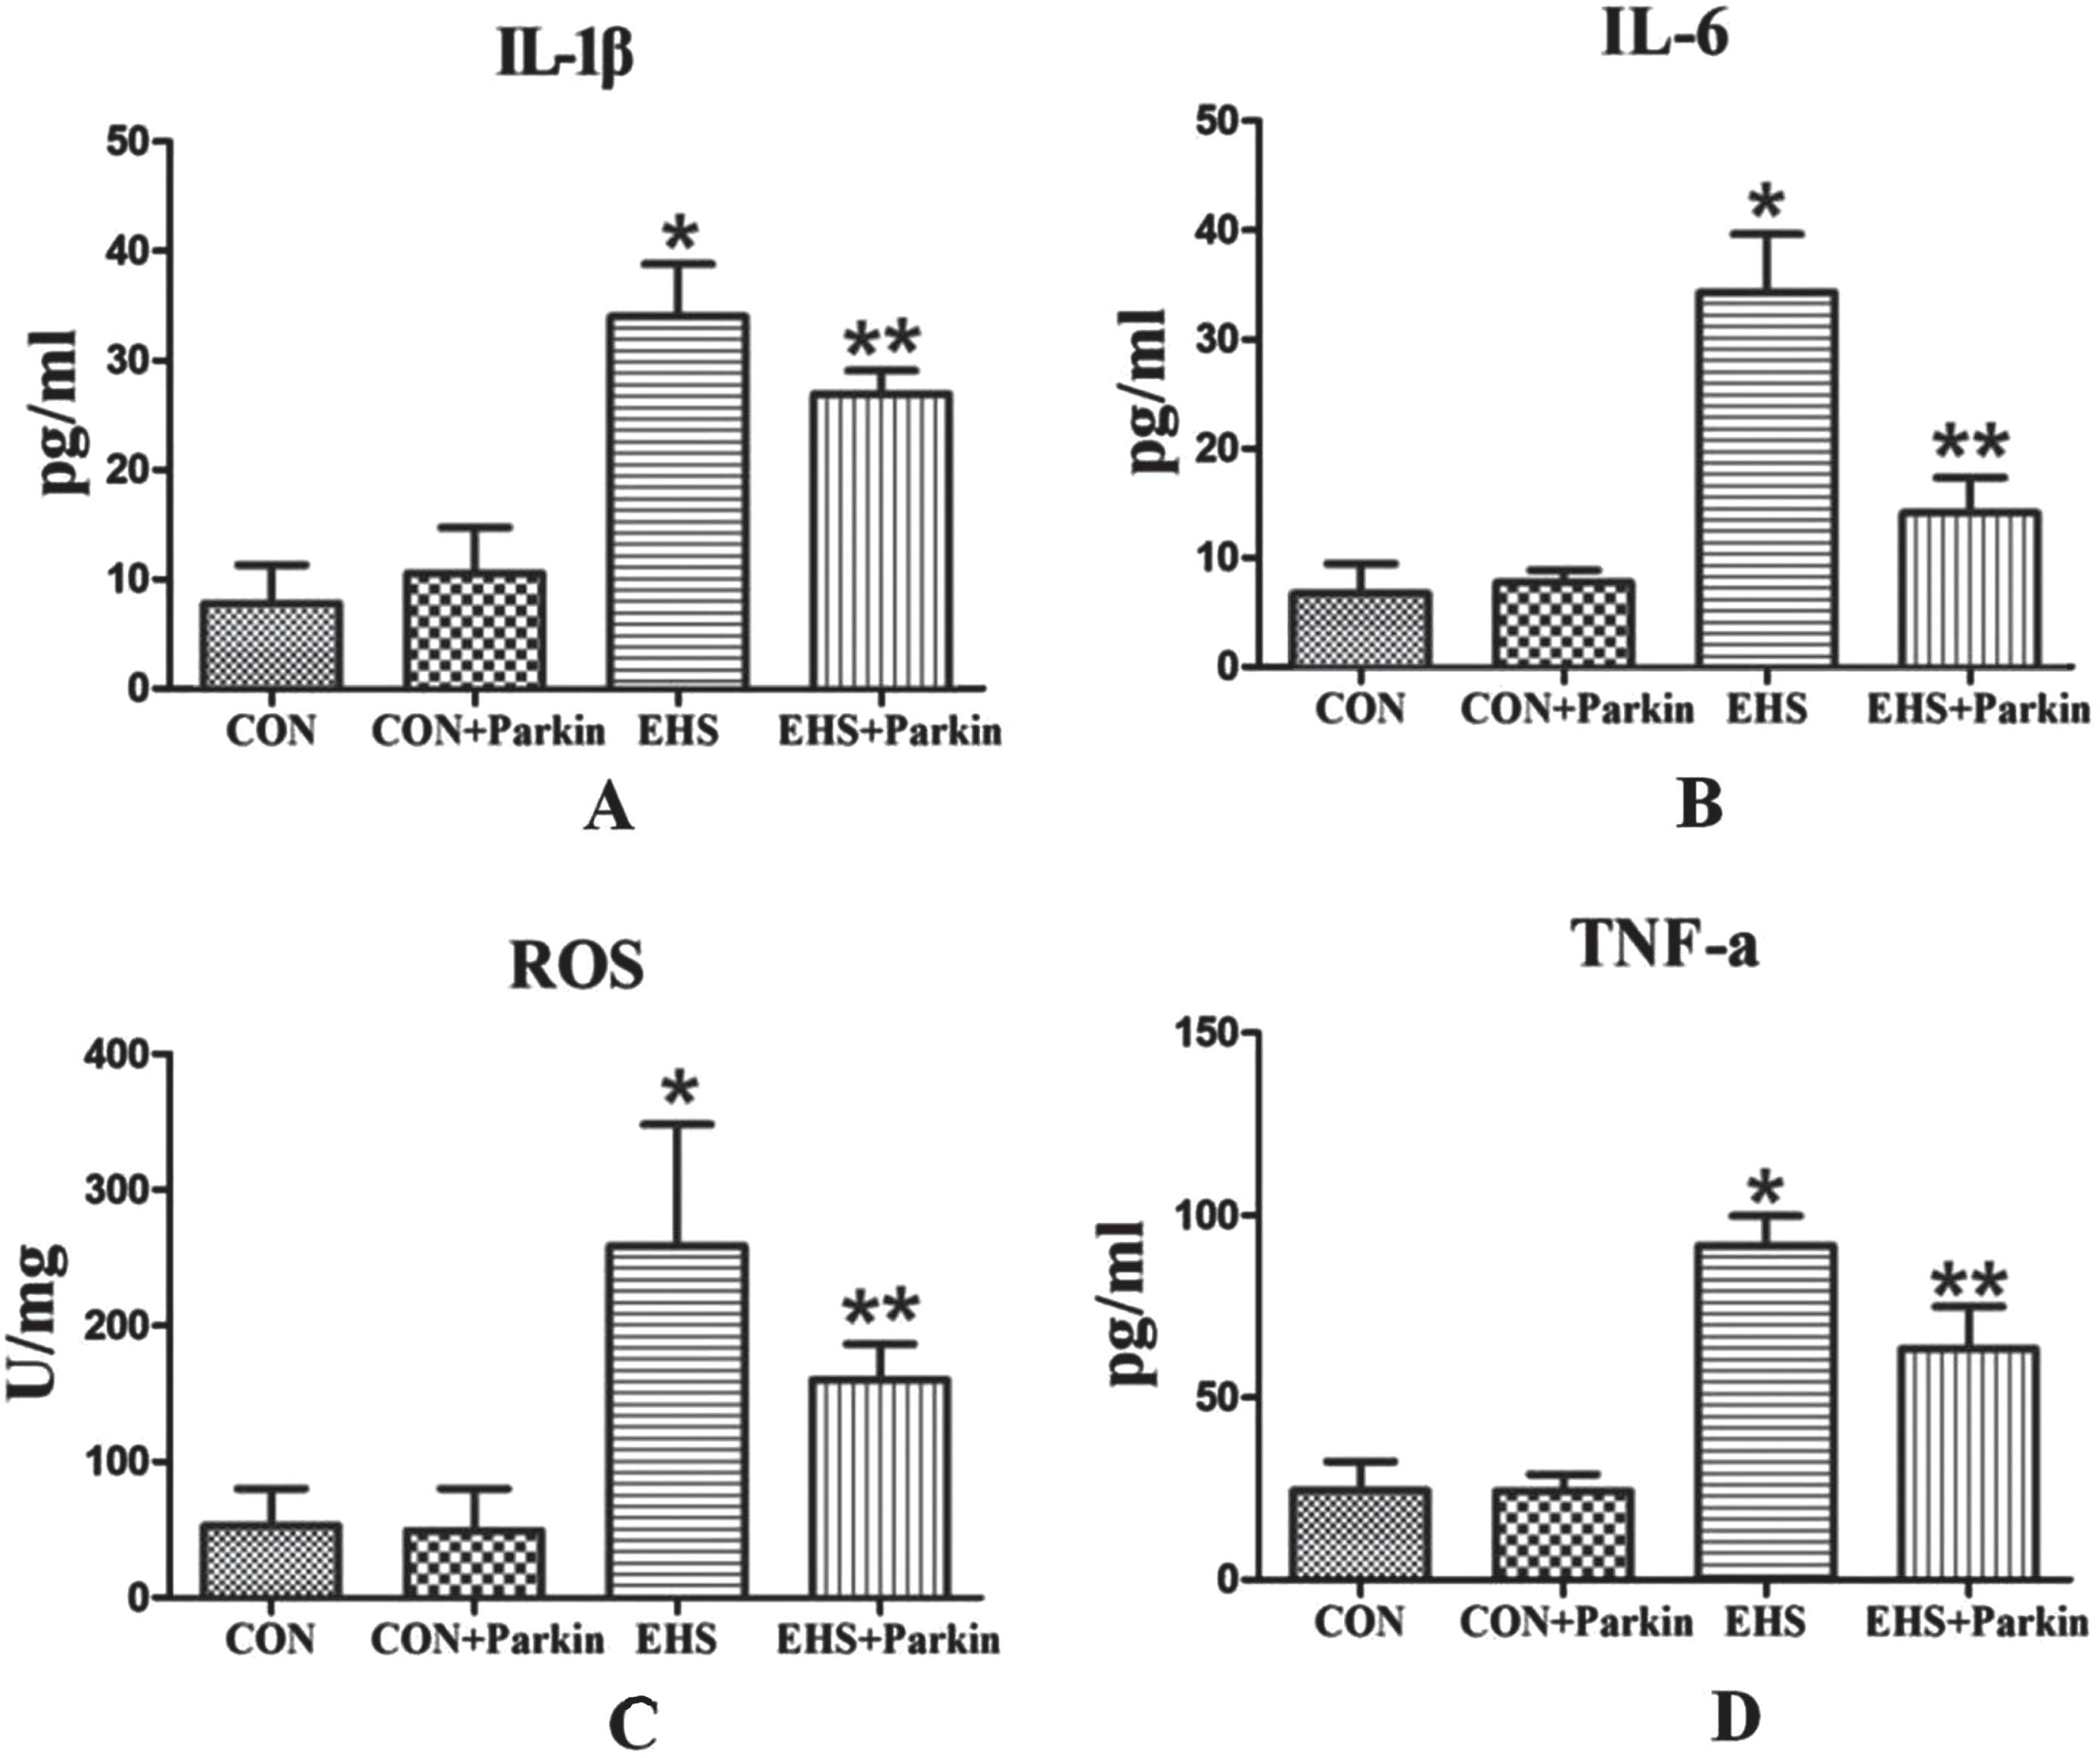 The Parkin over-expression rats attenuated the HS-induced increasing level of IL-1β, IL-6, TNF-α, and ROS in the lung (N = 5). A: IL-1β; B: IL-6; C: ROS; D: TNF-α. *P < 0.05 vs Control group; **P < 0.05 vs EHS group.